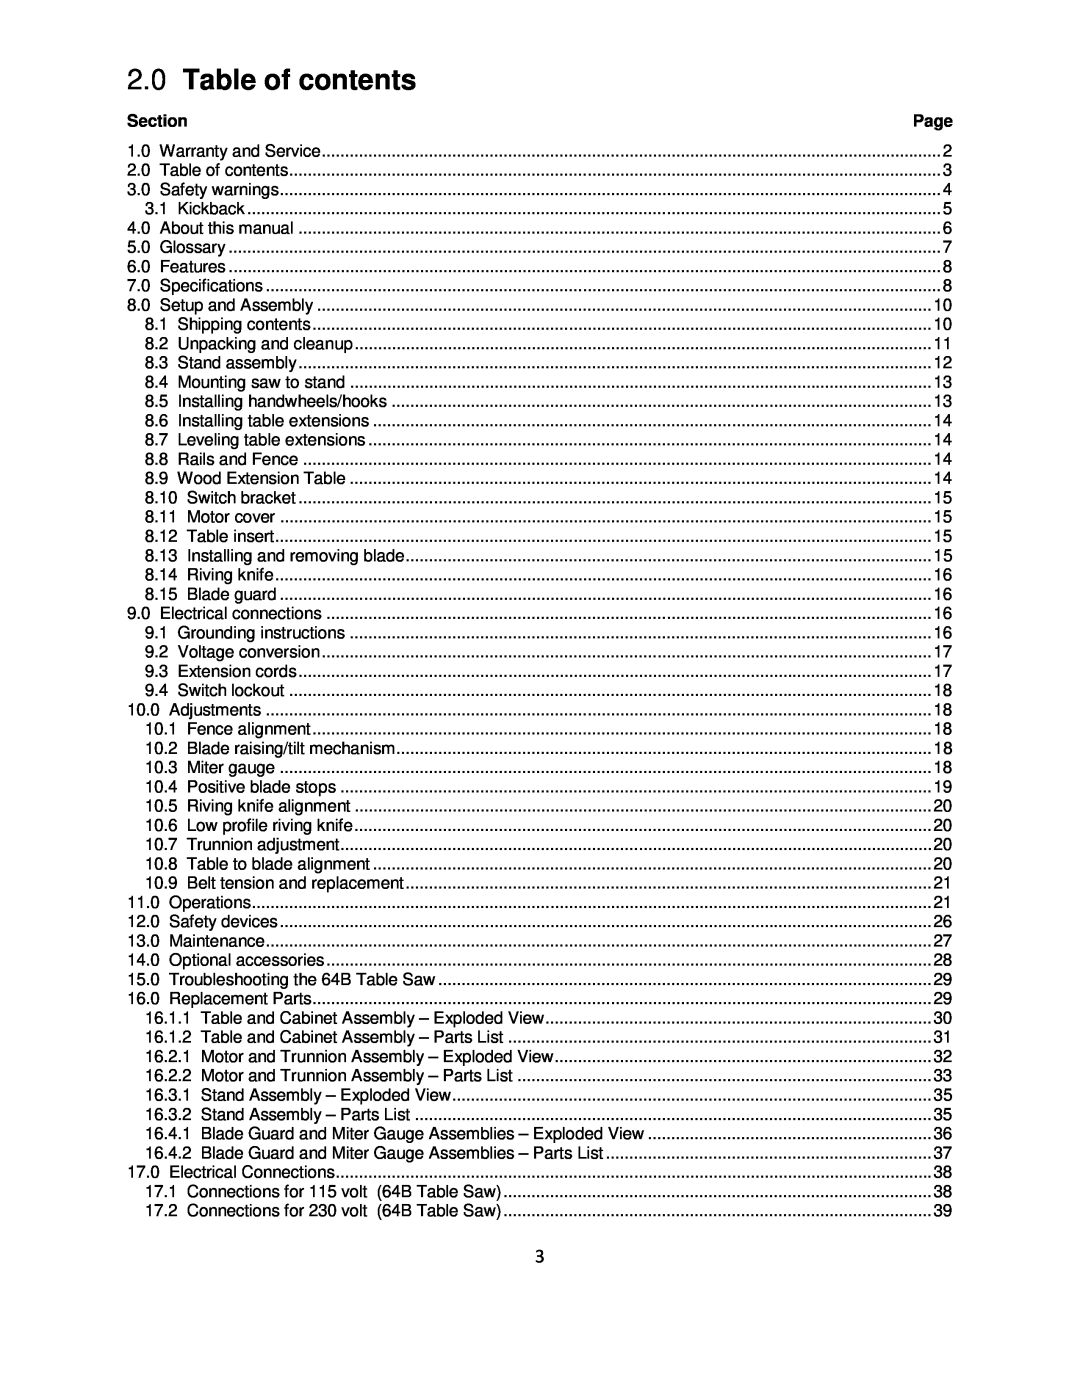 Powermatic 64B operating instructions Table of contents, Section 